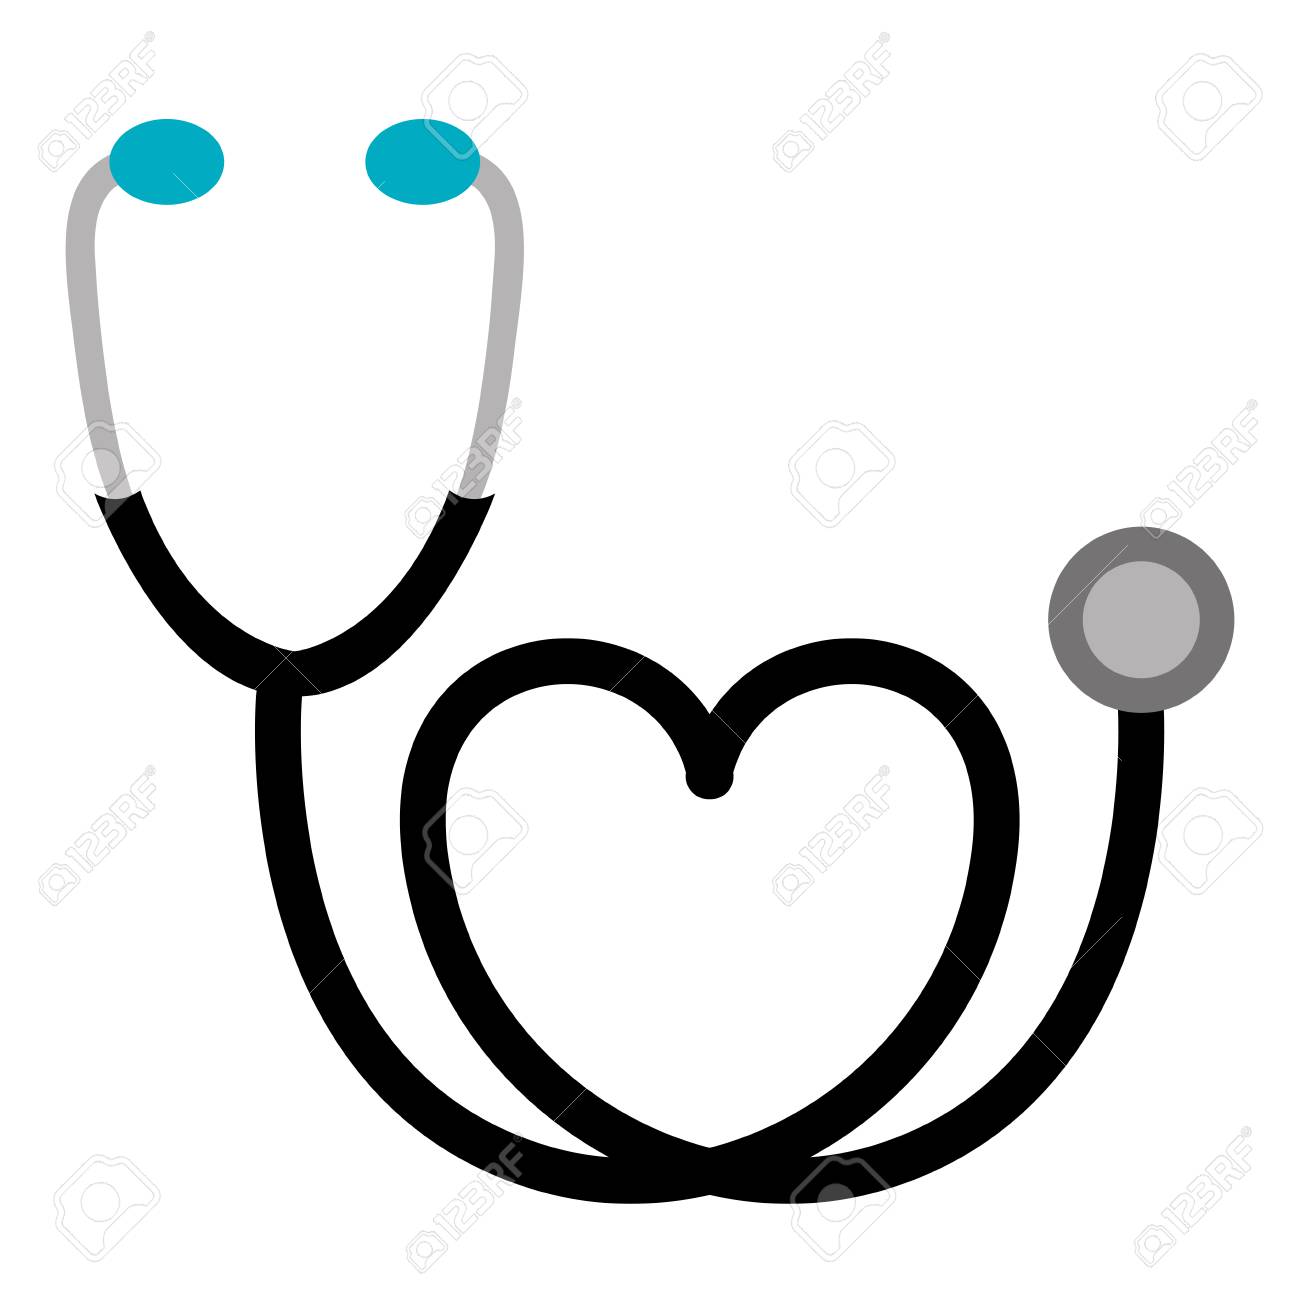 Black sticker stethoscope with heart icon